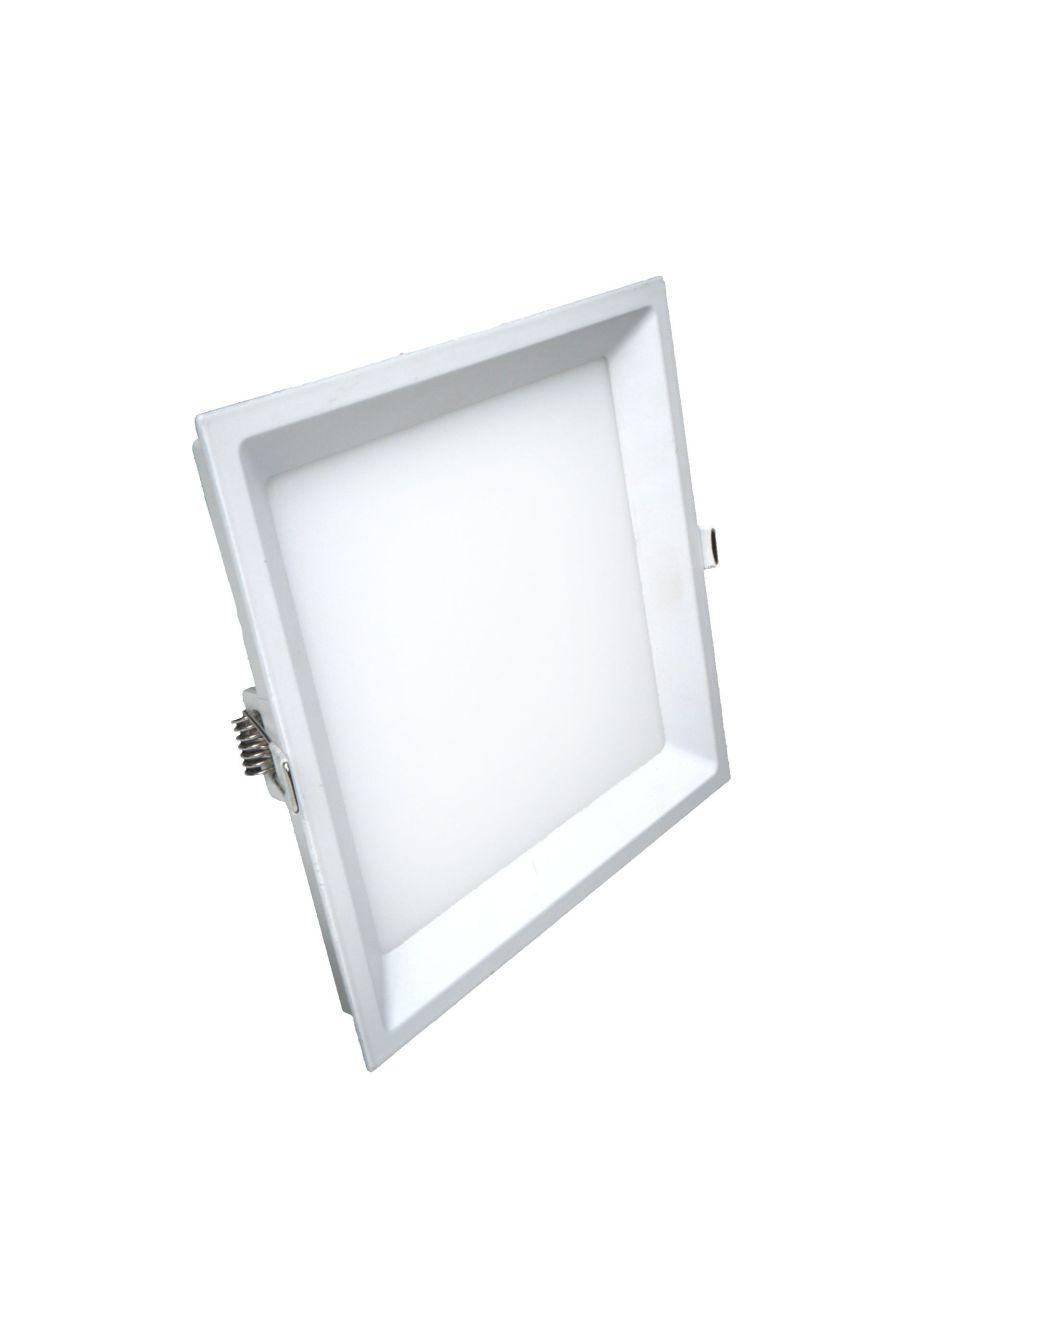 High Quality LED Panellight 300X300 600X600 Ceiling Light 24W 36W 48W Ceiling Surface Mounted LED Panel Light for Home Shopping Mall 10W Panel Light